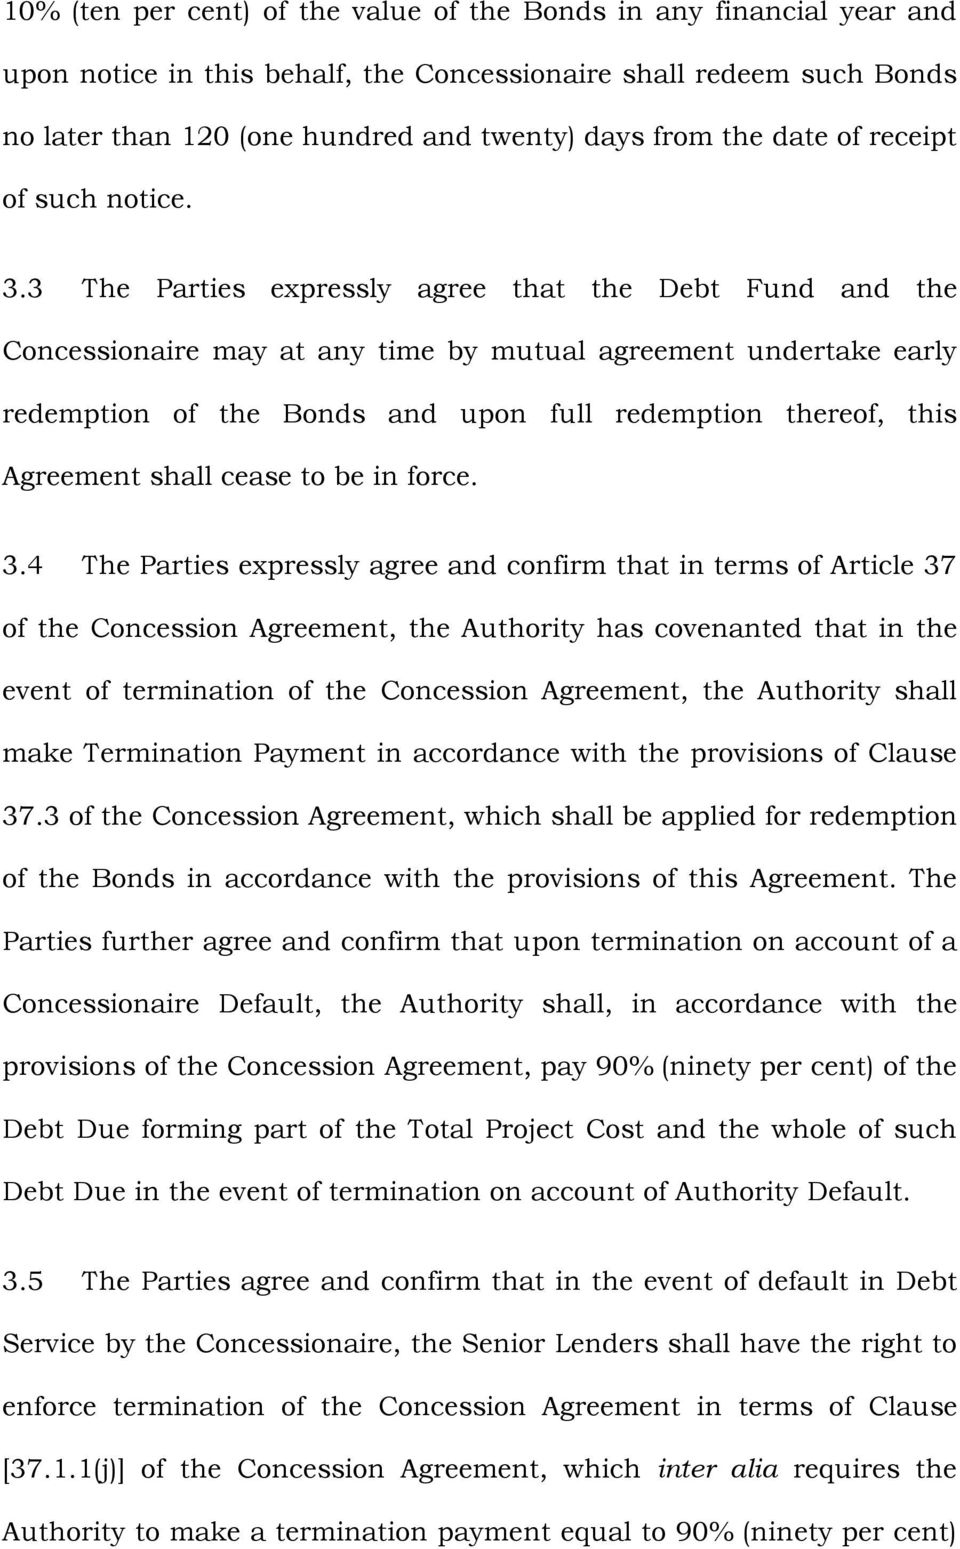 3 The Parties expressly agree that the Debt Fund and the Concessionaire may at any time by mutual agreement undertake early redemption of the Bonds and upon full redemption thereof, this Agreement